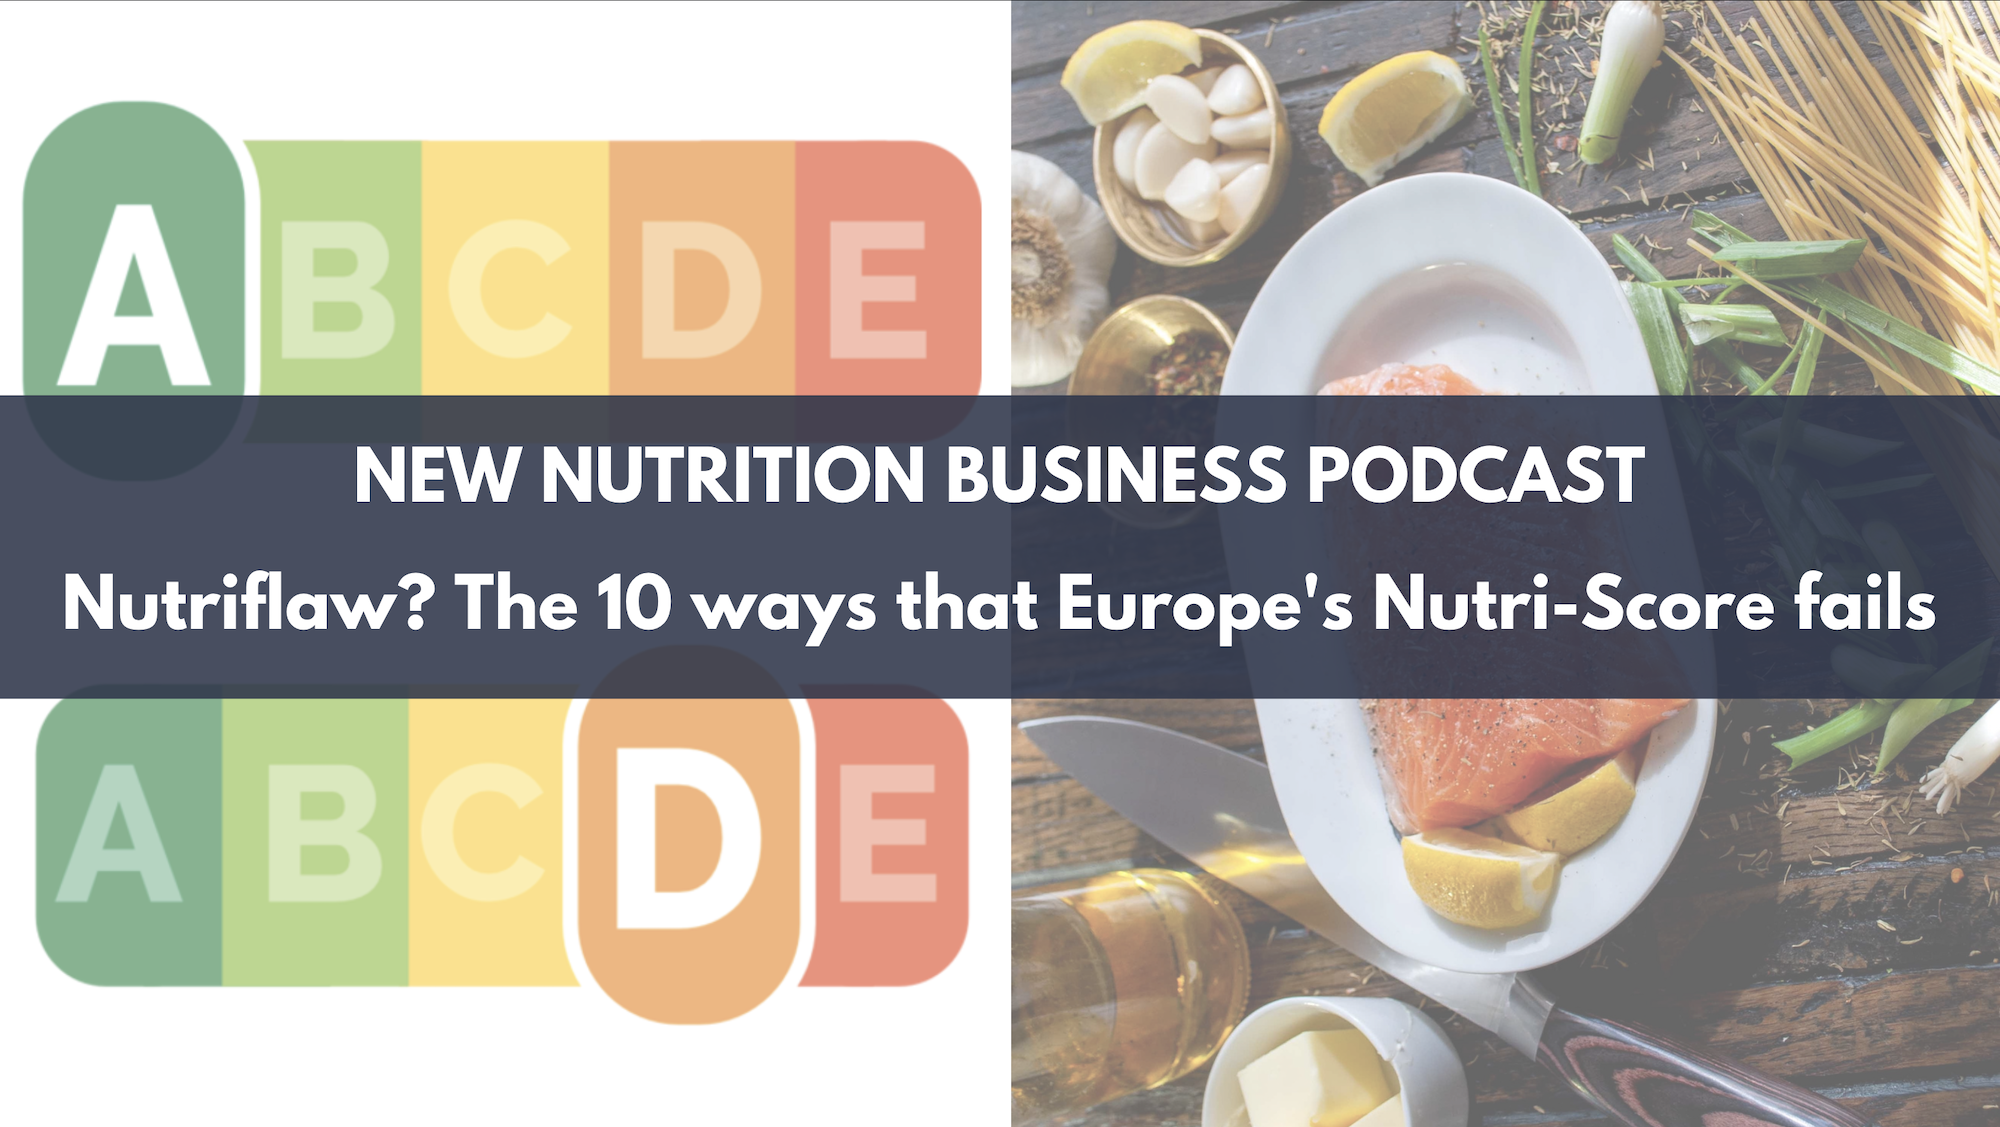 Podcast: Nutriflaw? The 10 ways that Europe's Nutri-Score fails